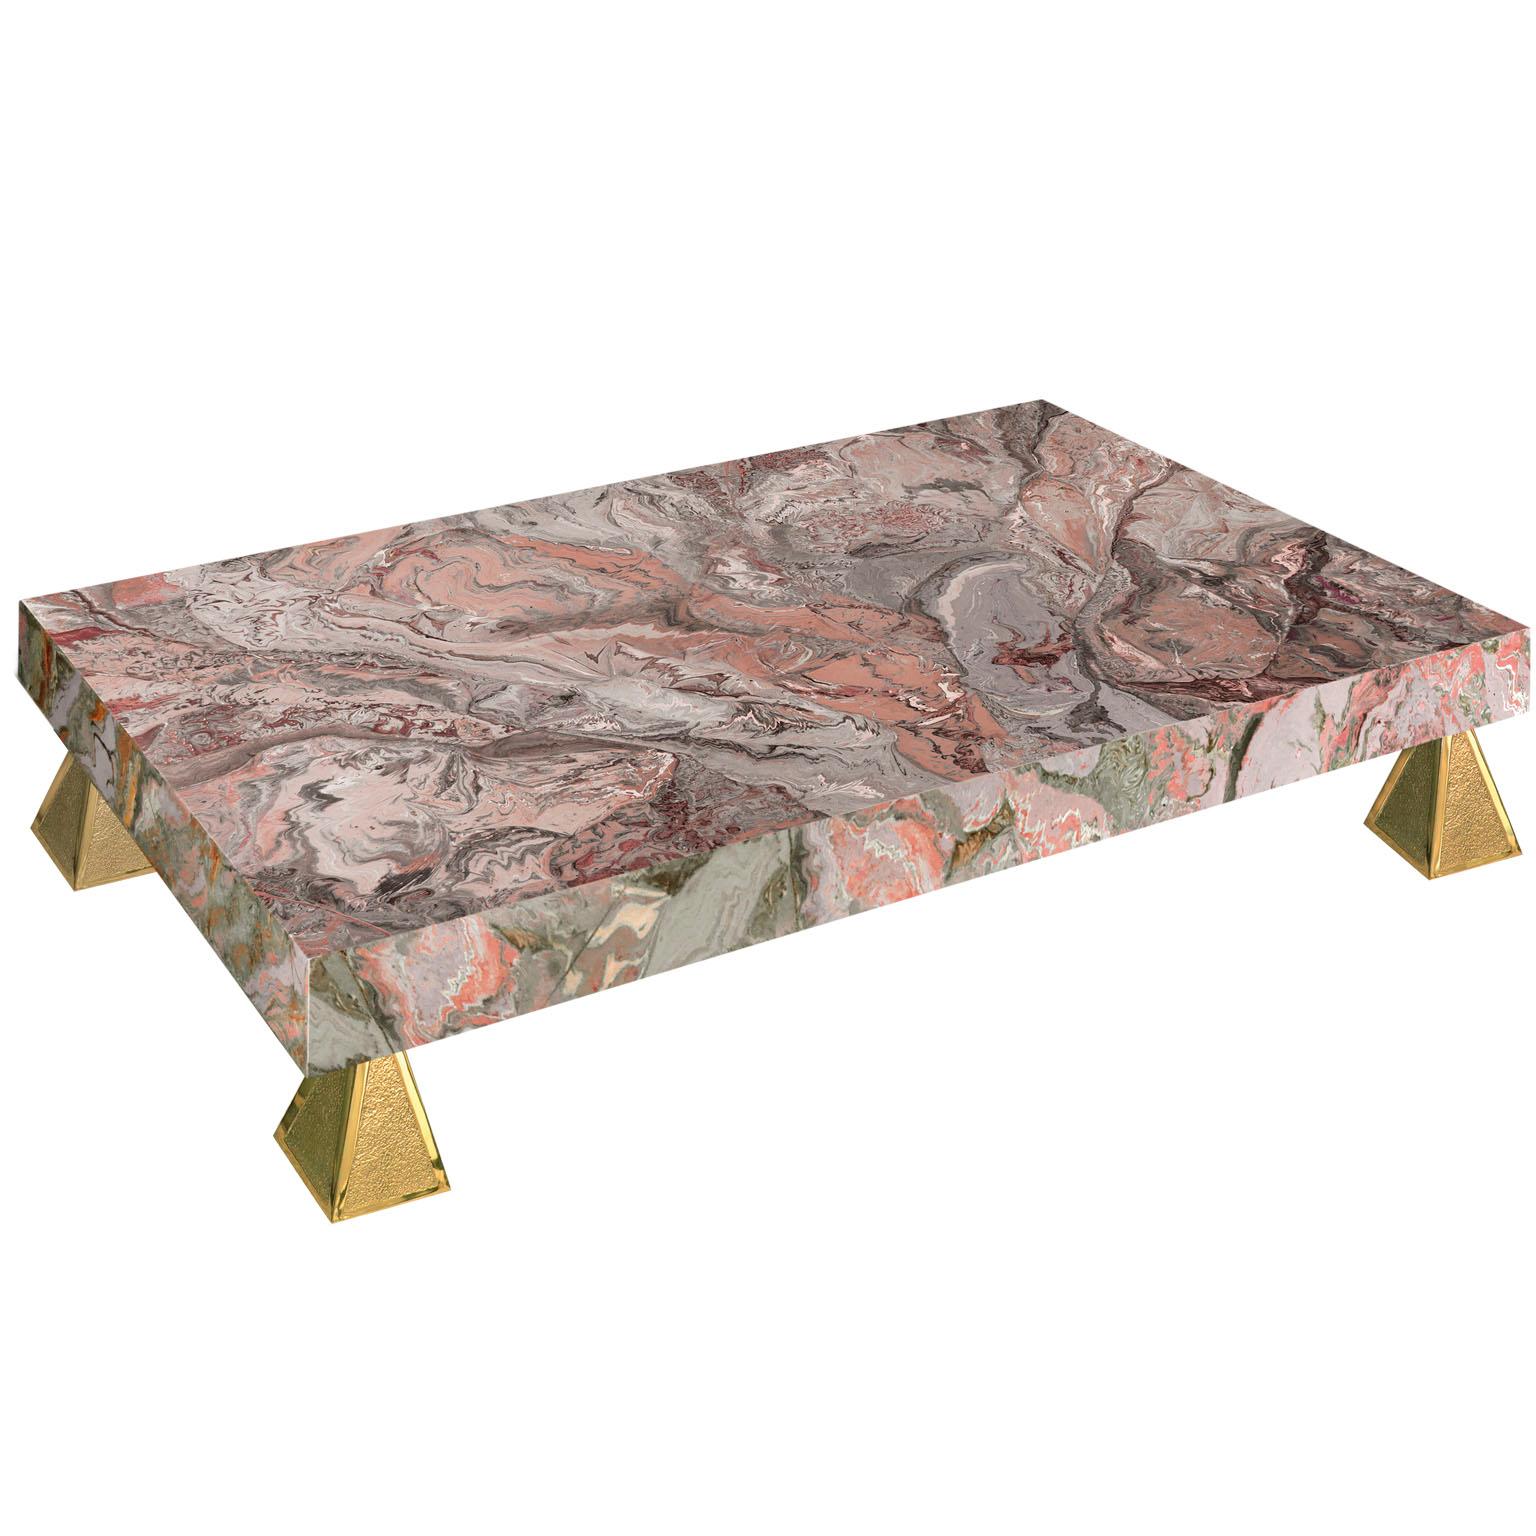 Pink grey Coffee Table Marbled Scagliola art Handmade  Casted Brass Feet